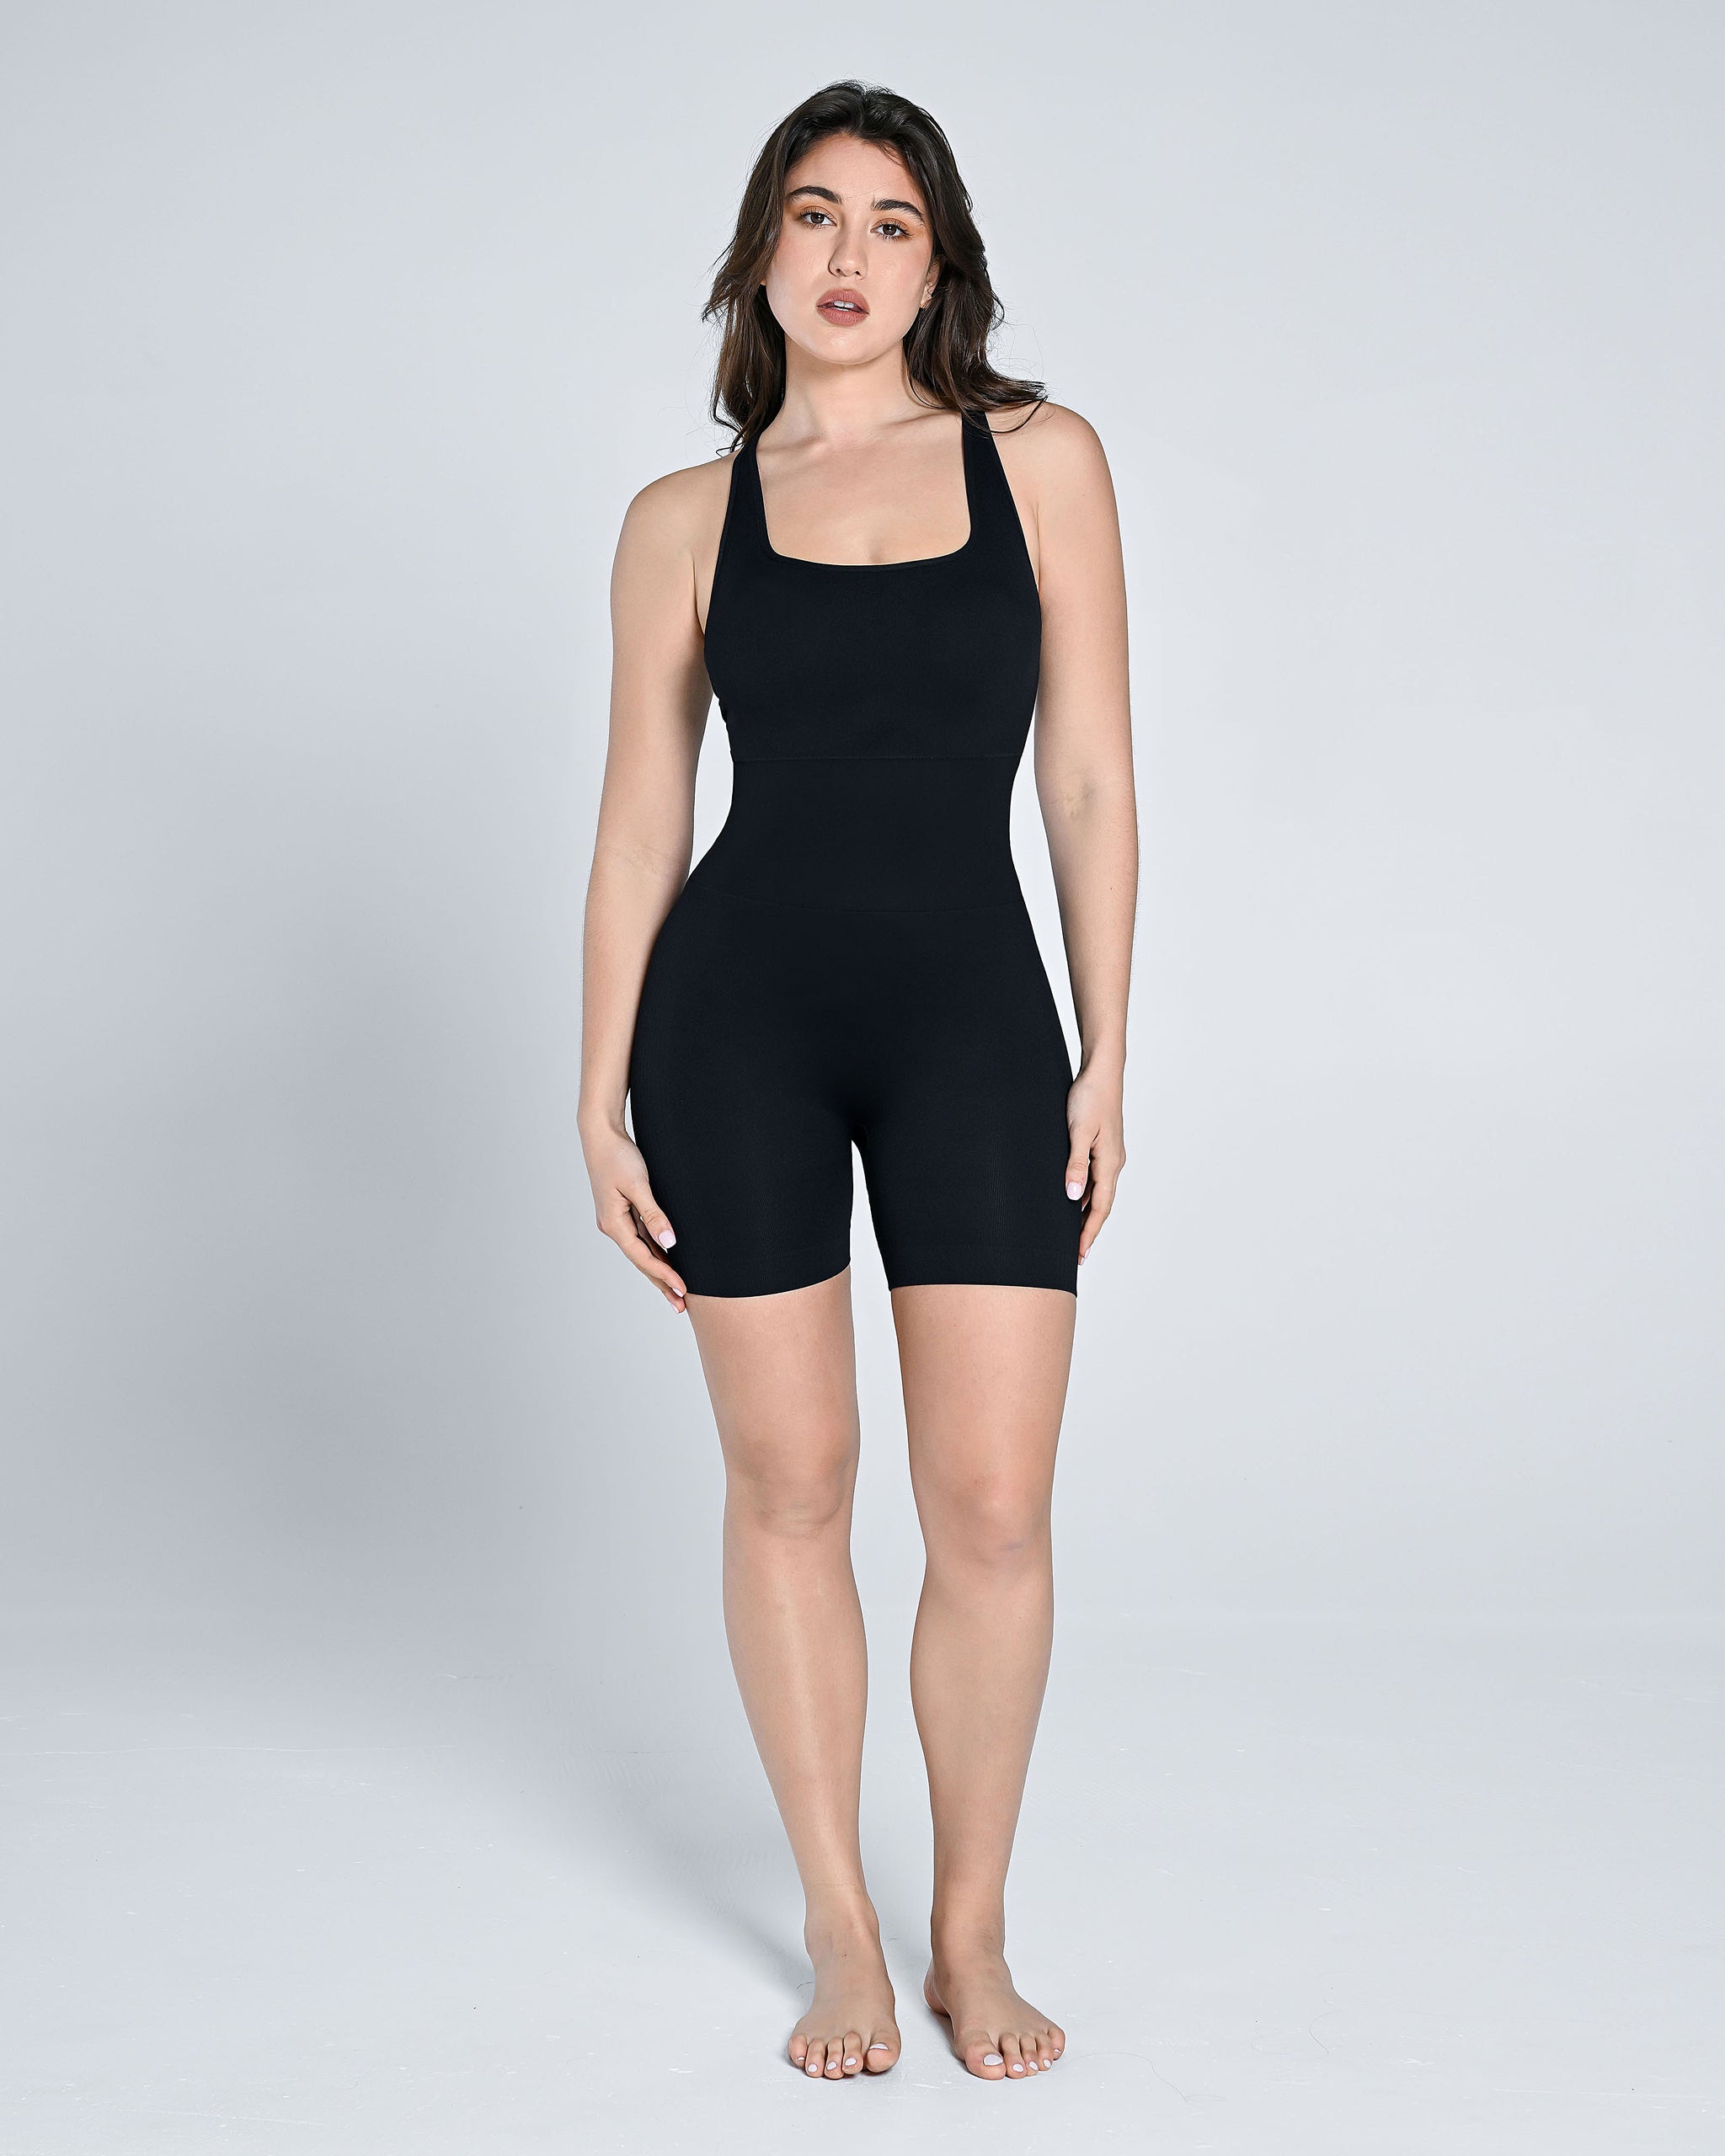 Women's Plus Size One Piece Jumpsuit for Workout Yoga Dance Strappy Athletic  Bodysuit Open Back Rompers 3XL(18) 